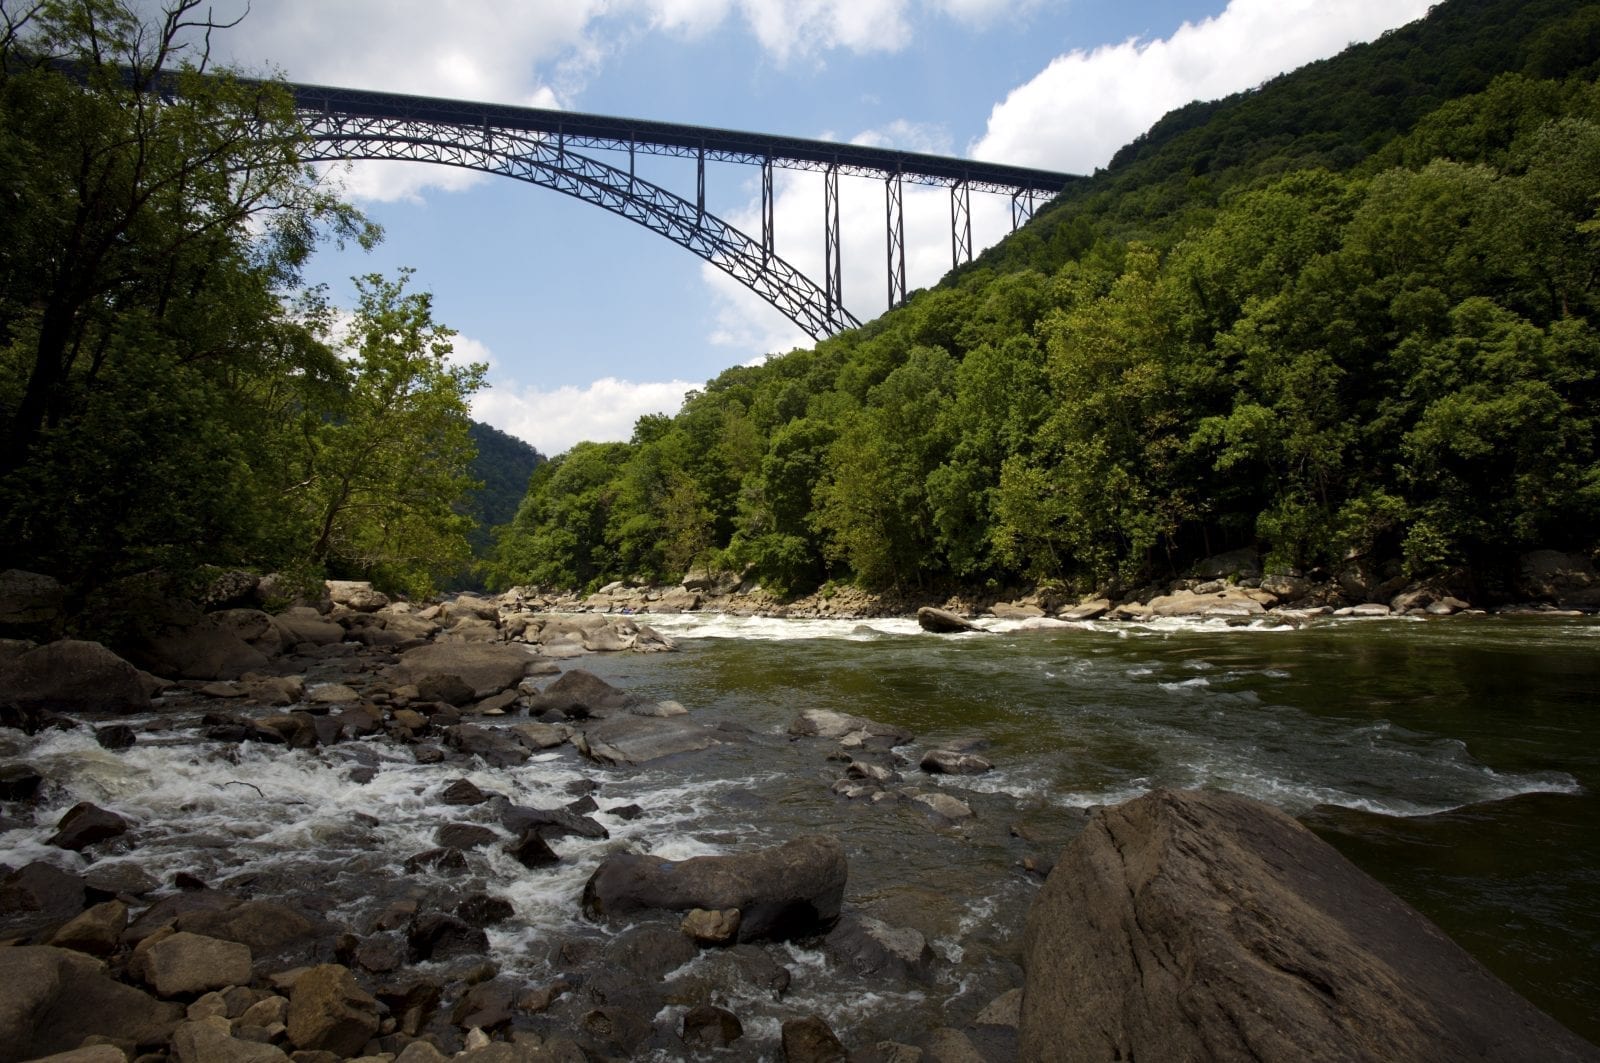 New River Gorge Bridge located in the Appalachian Mountains of southern West Virginia. Photograph by Robert Pernell